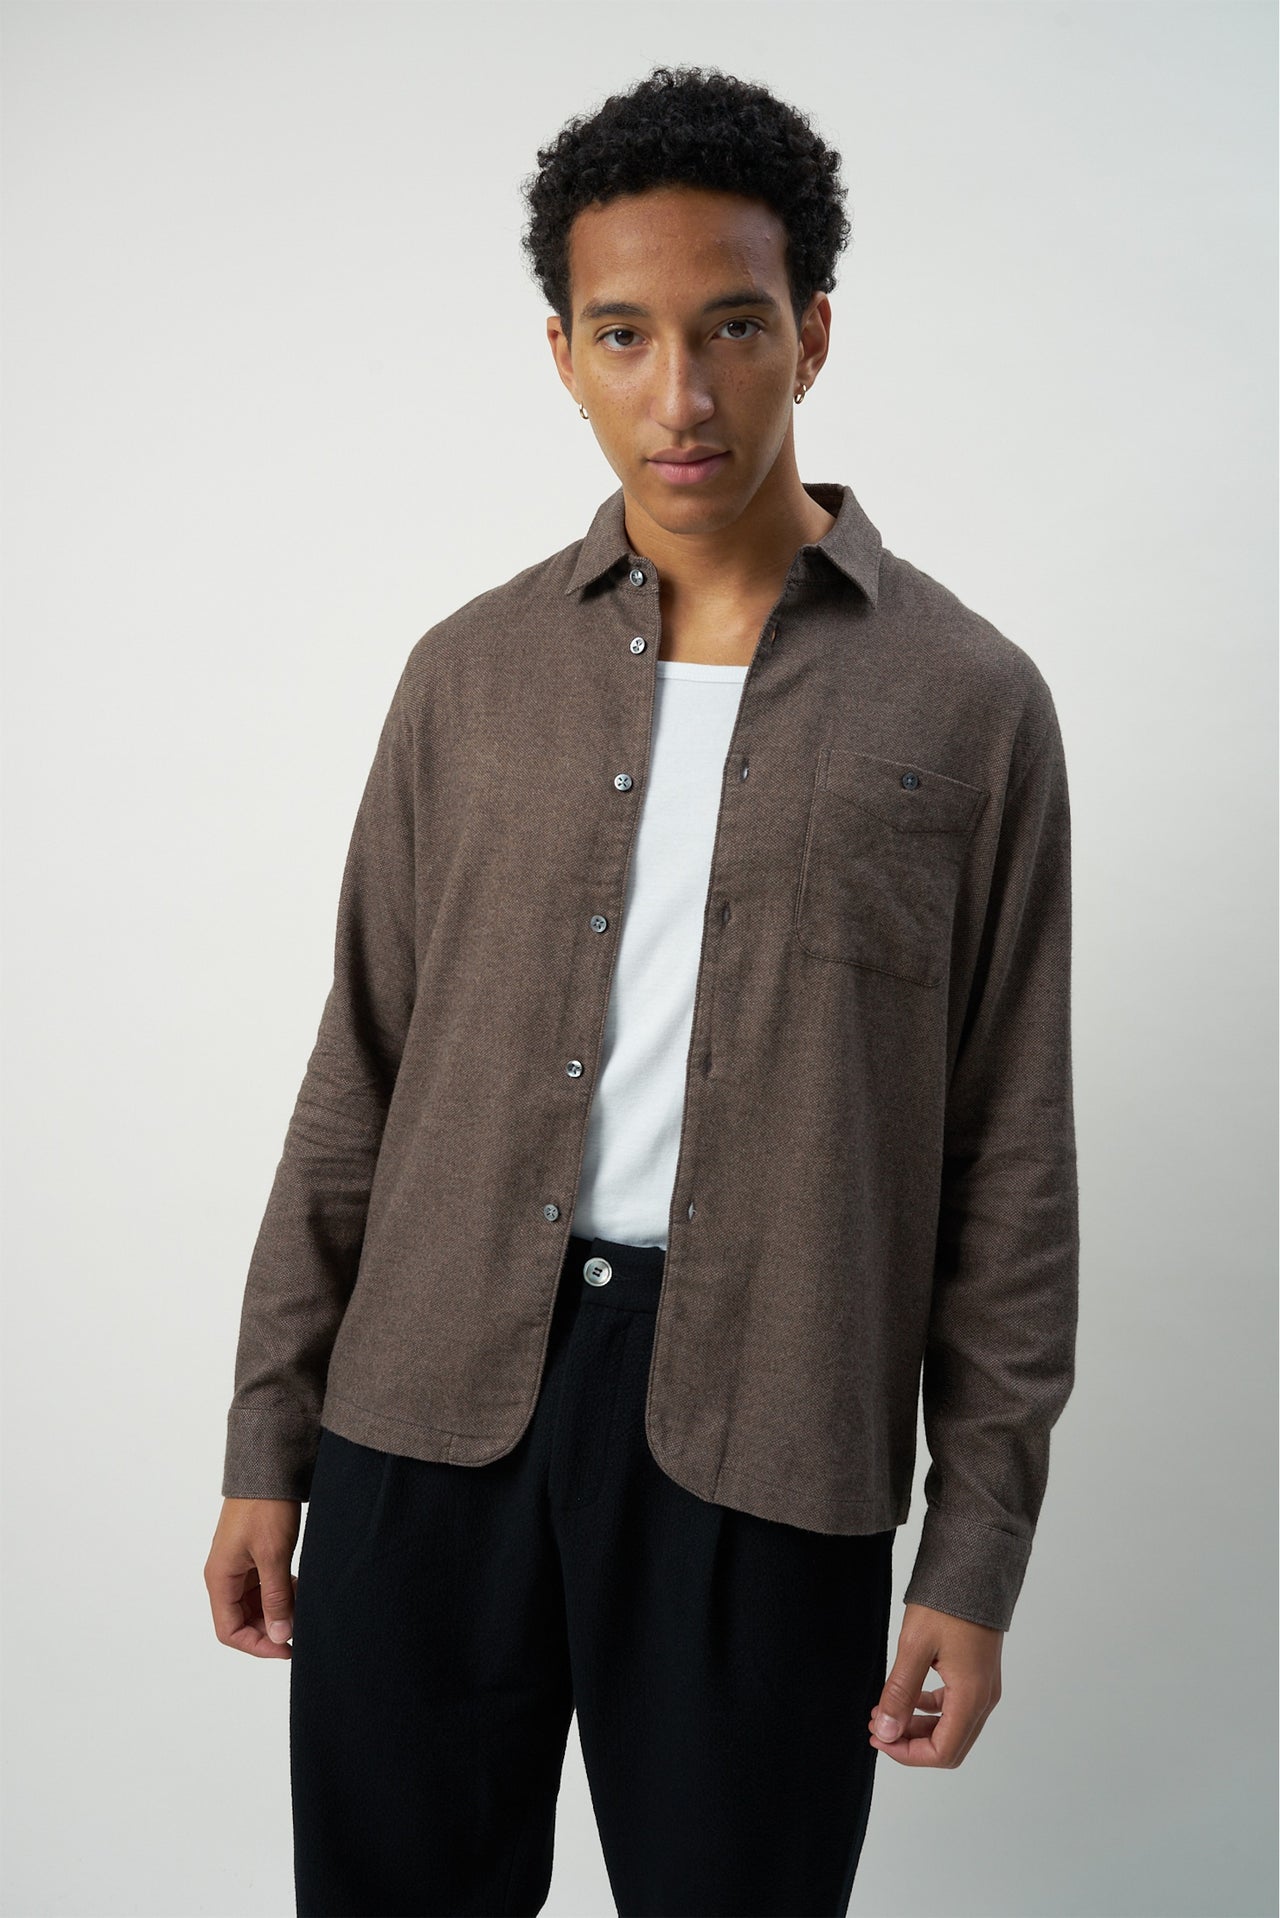 Strong Shirt in a Subtle Brown Double Brushed Italian Cotton Flannel